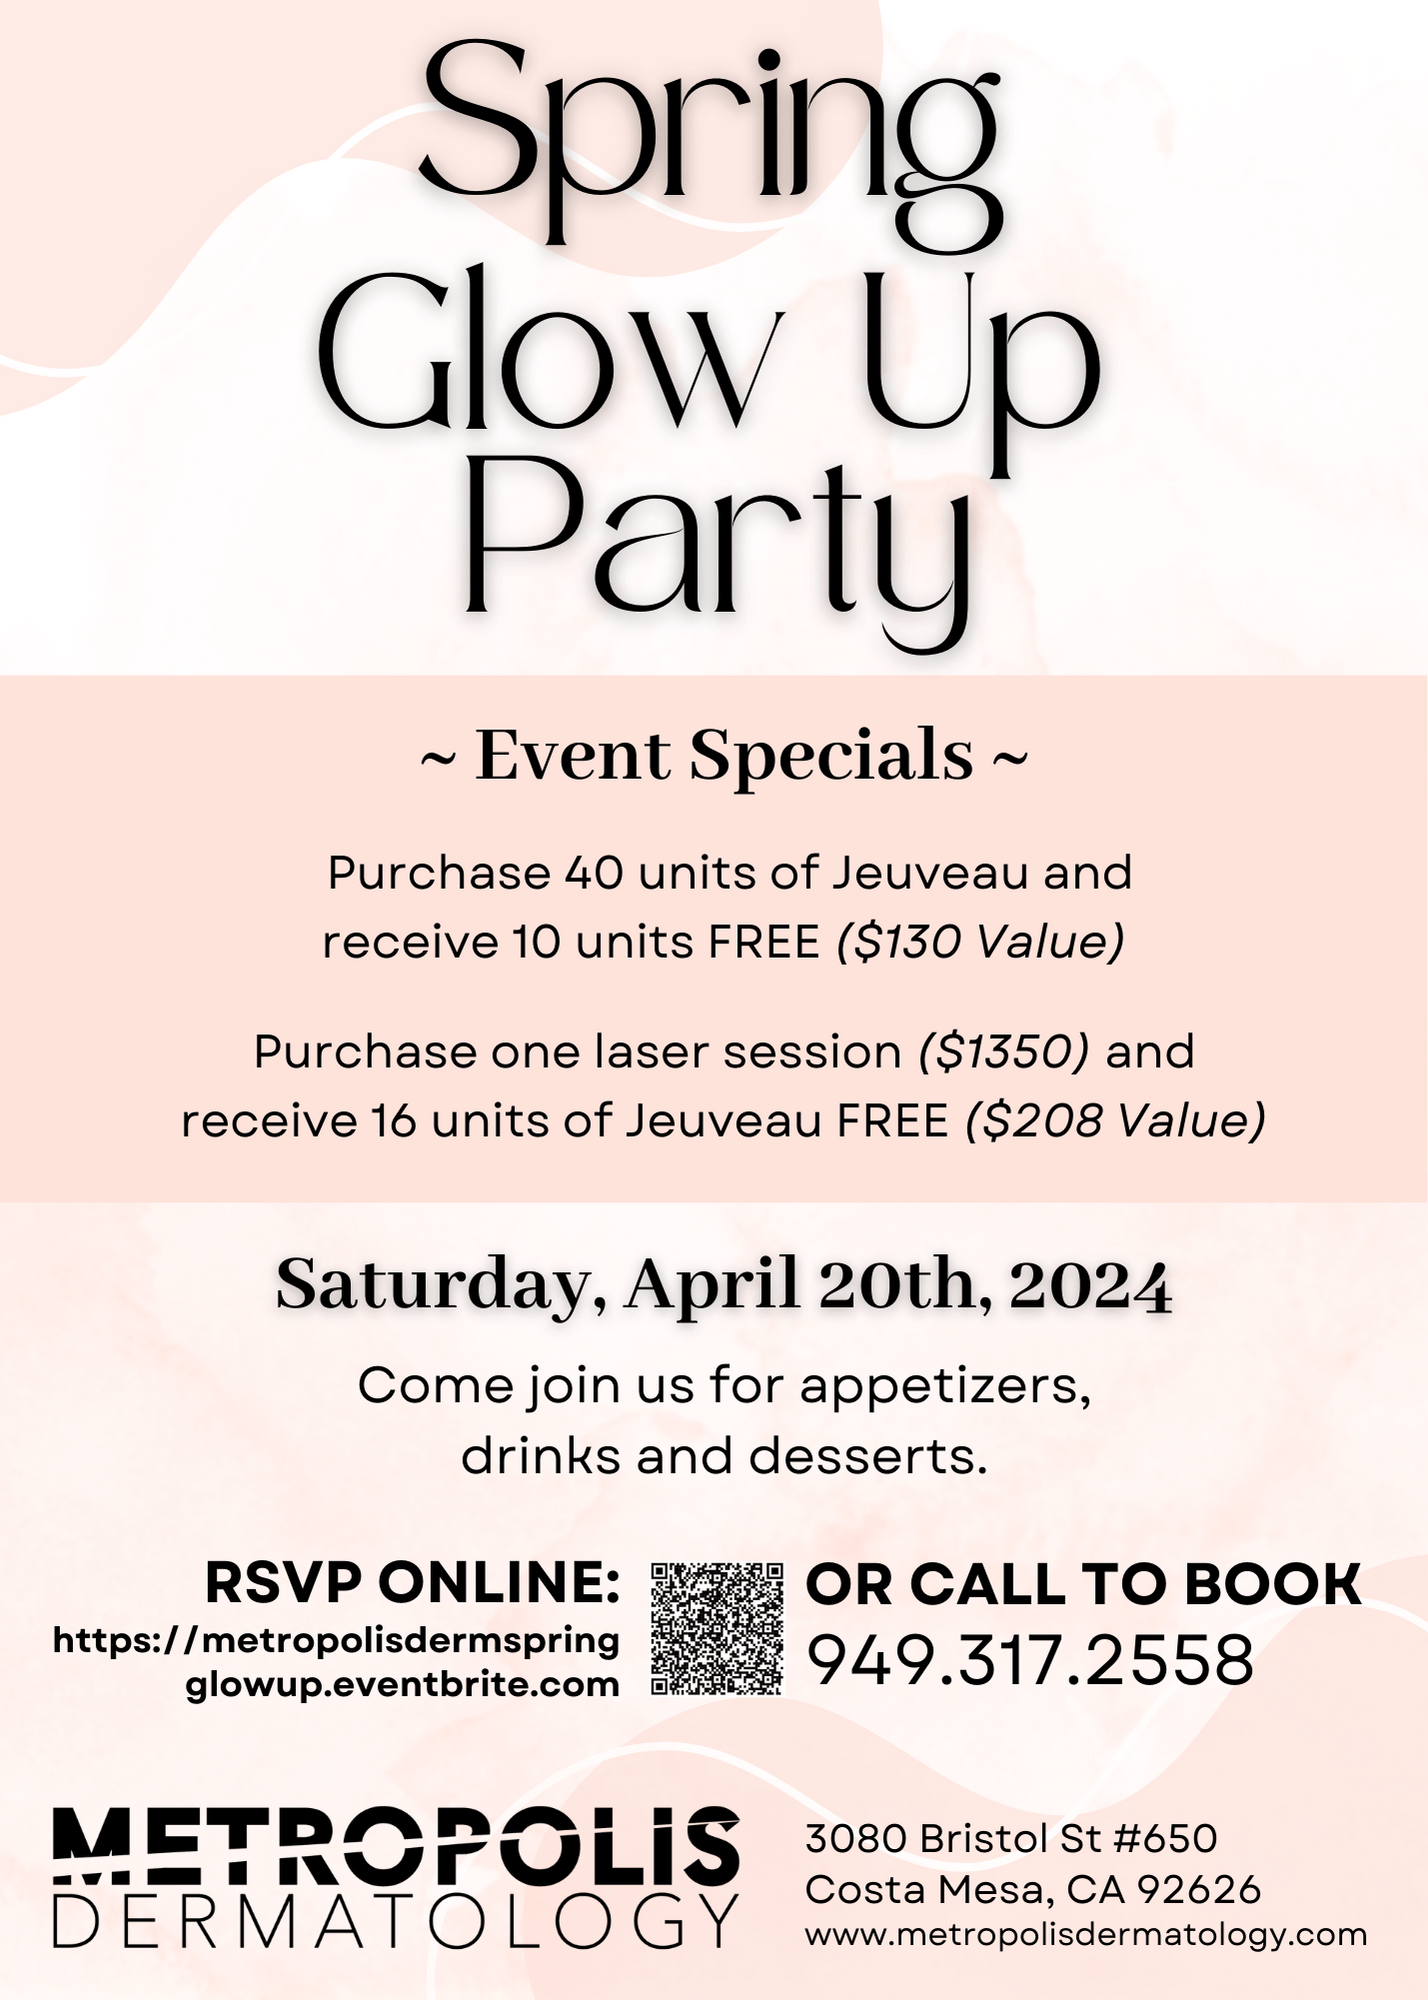 Spring Glow Up Party with Metropolis Dermatology